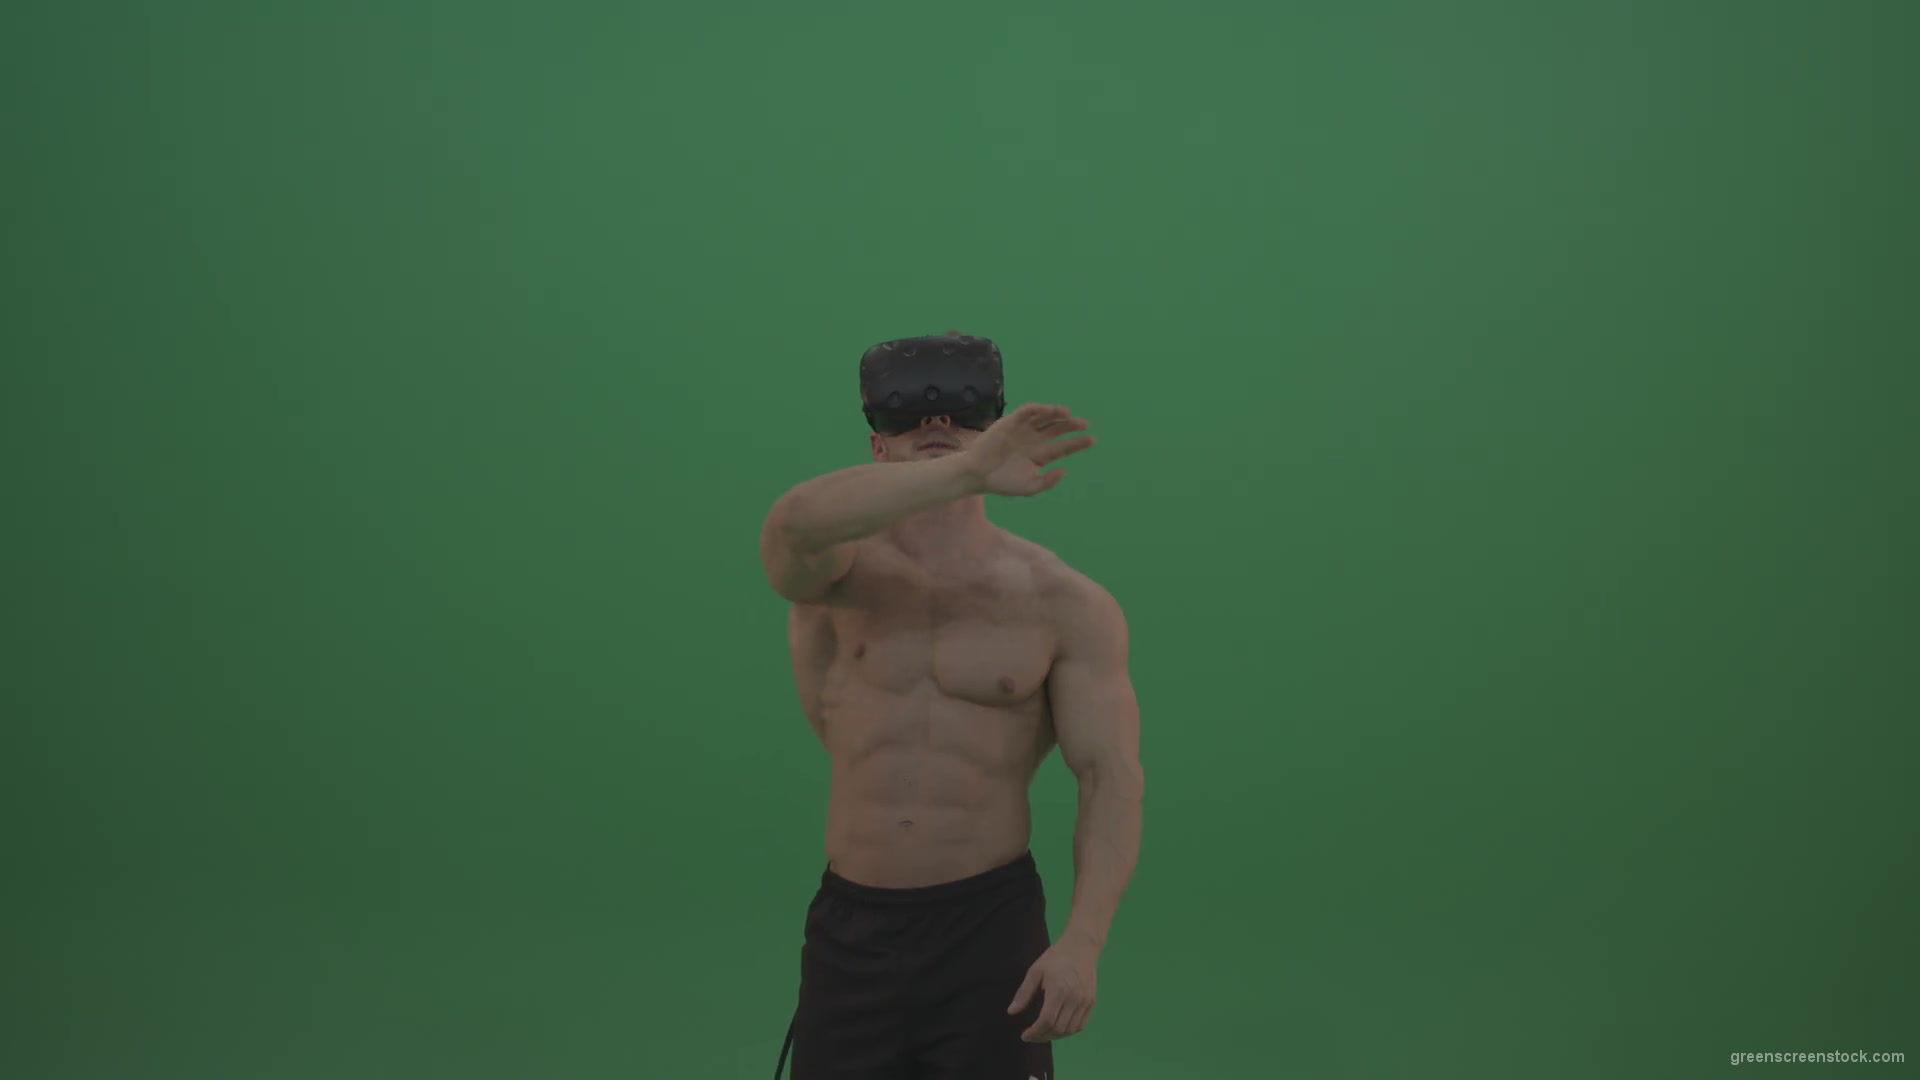 Young_Athletic_Bodybuilder_Working_On_Touch_Pad_Using_Virtual_Reality_Kit_On_Green_Screen_Wall_Background-1920_007 Green Screen Stock